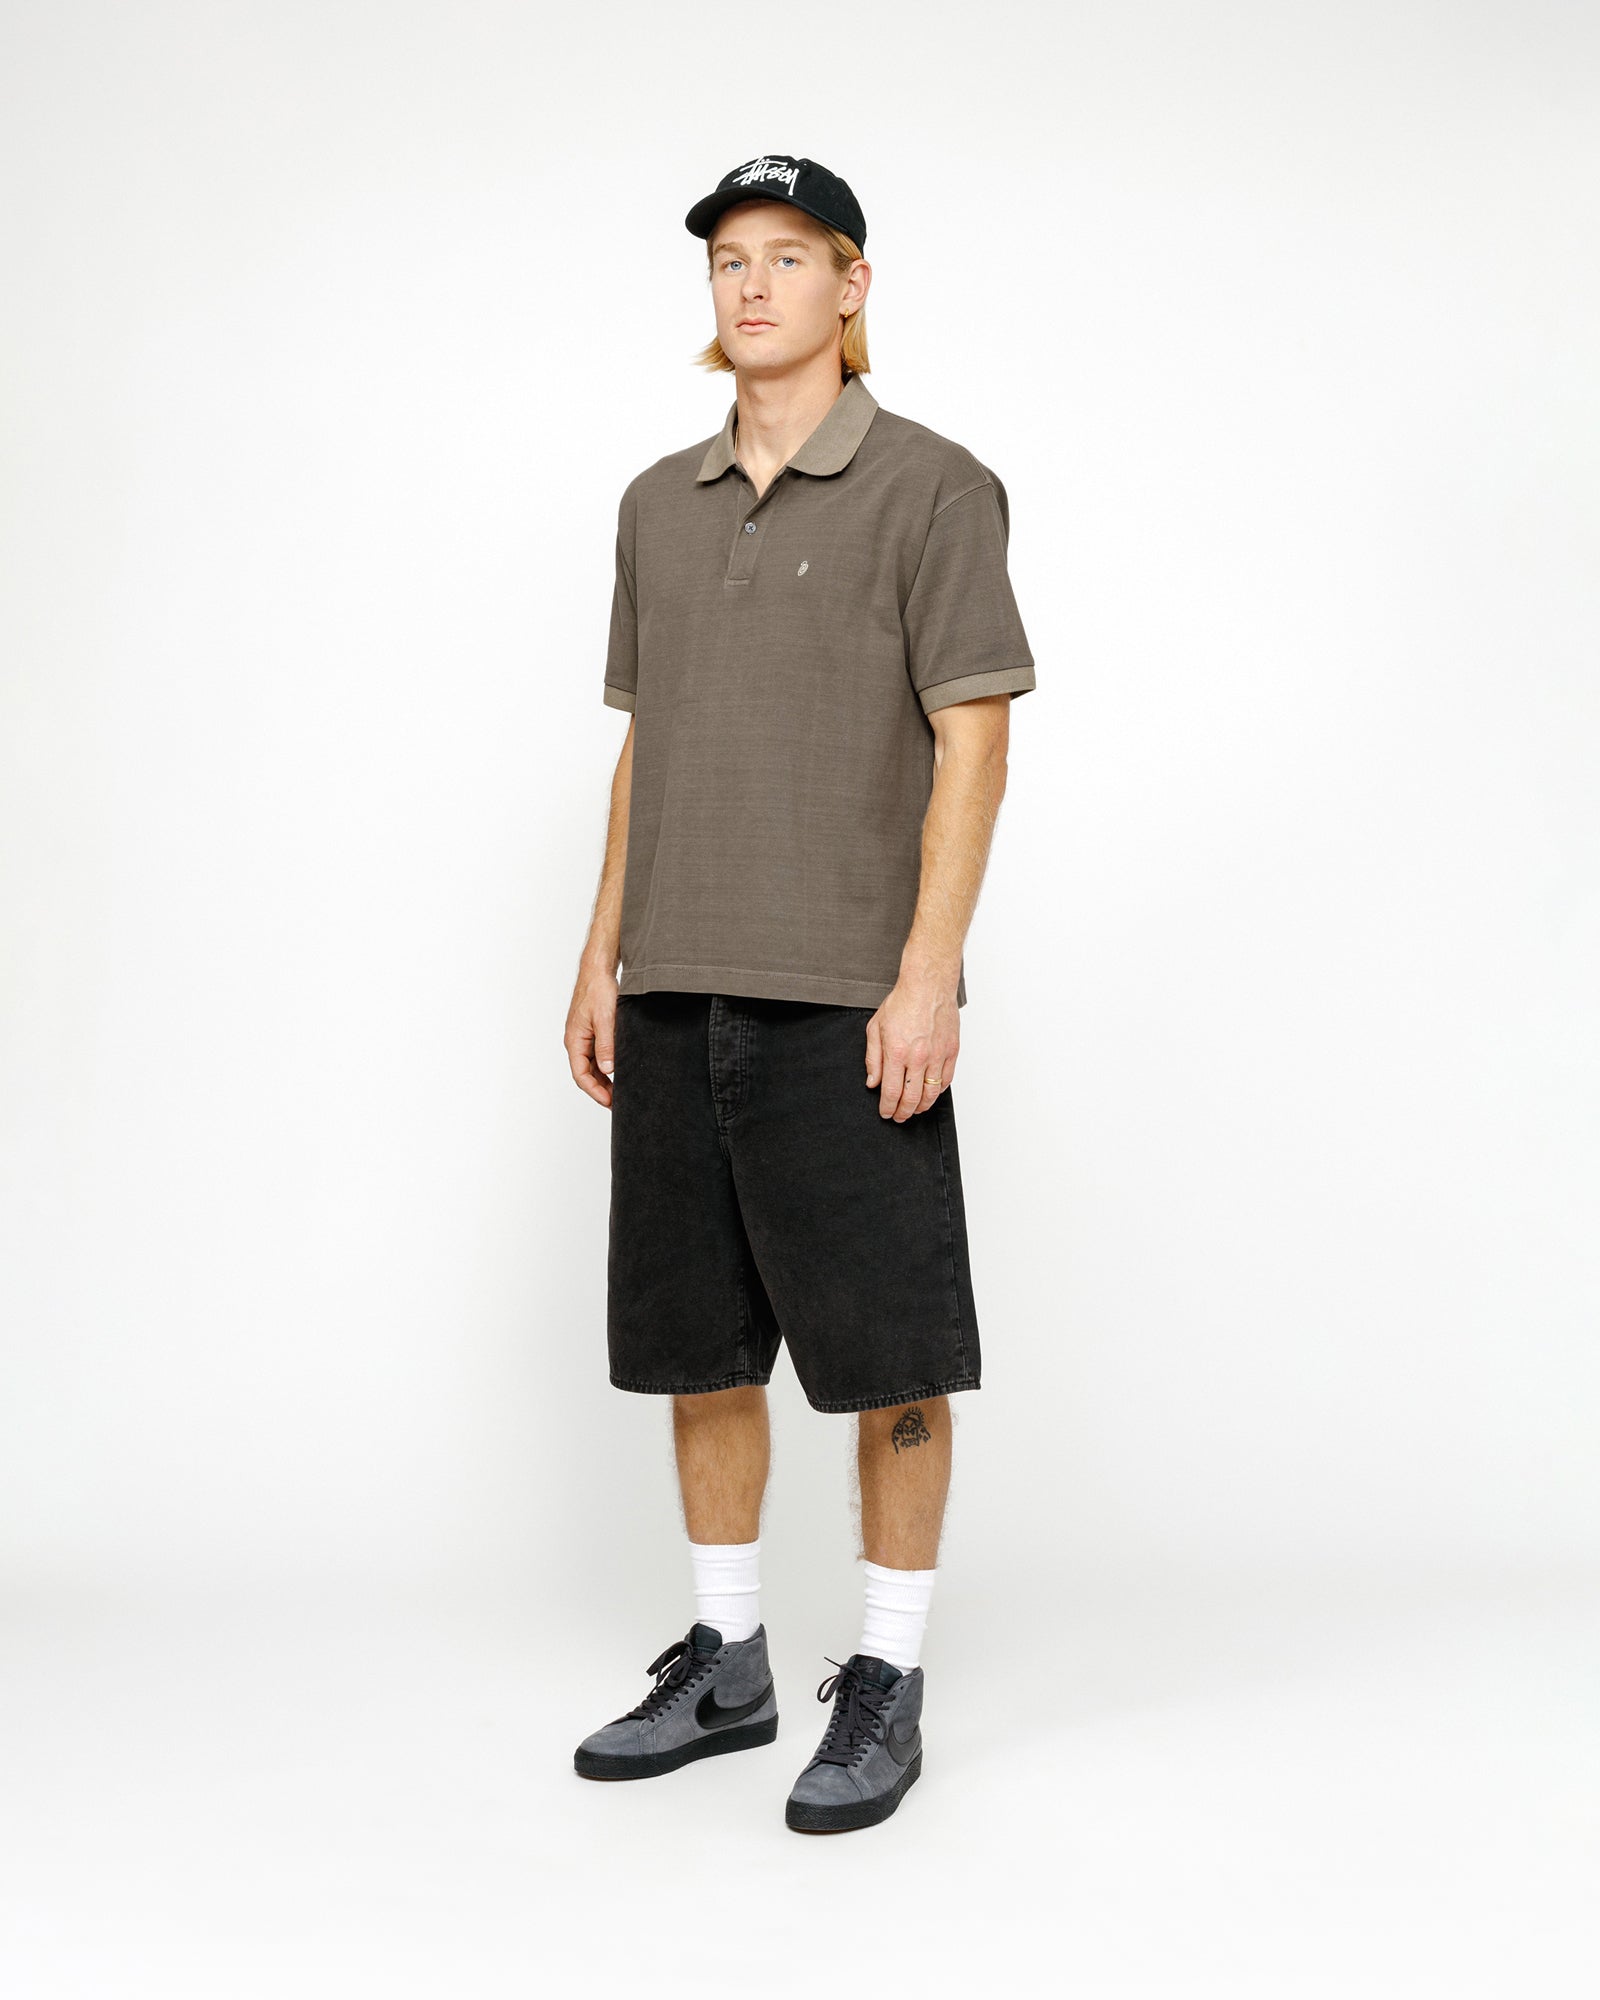 STÜSSY PIGMENT DYED PIQUE POLO TAUPE SHIRT